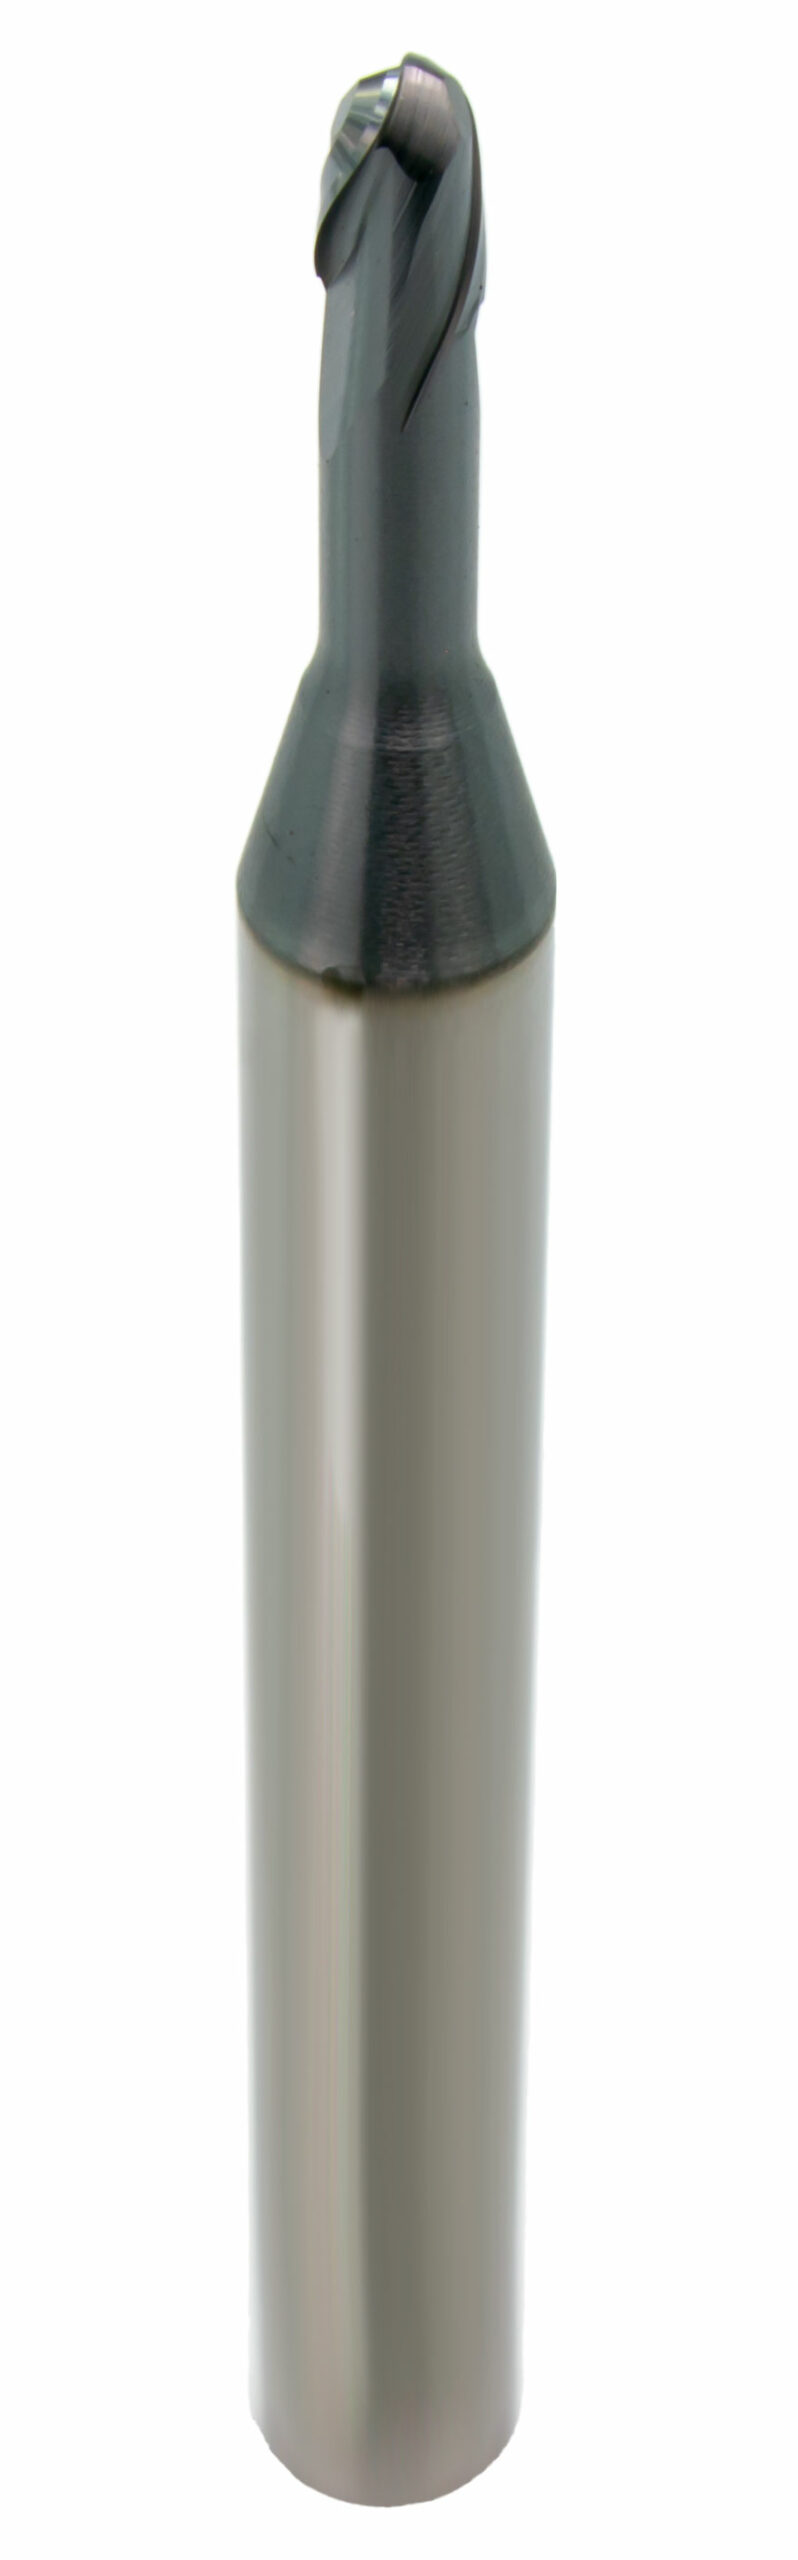 WEDCO GWFL ball nose end mill from above